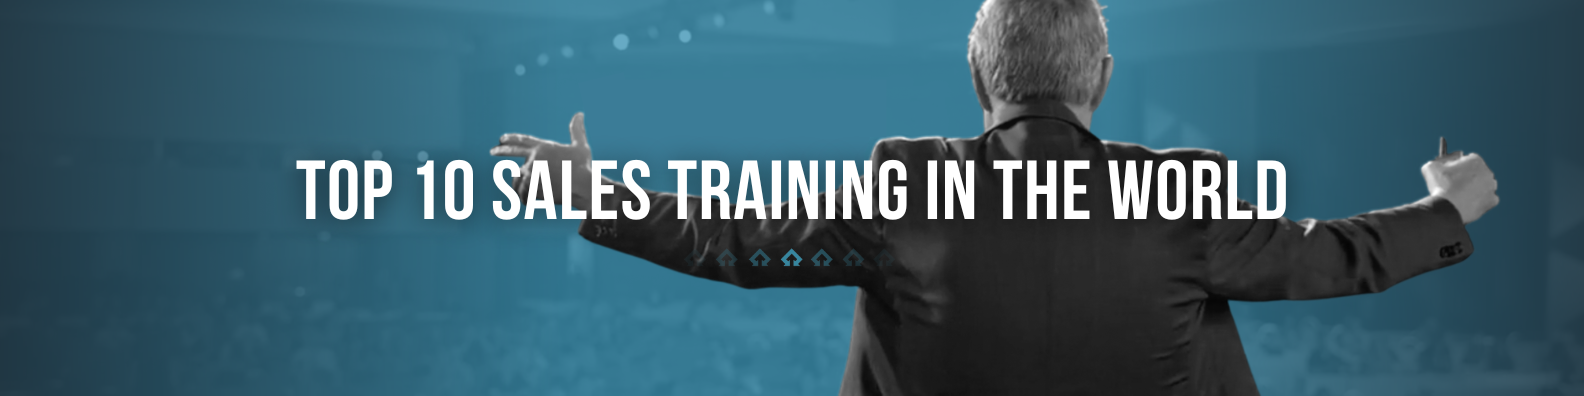 Top 10 Sales Training in the World - Voted by Global Gurus